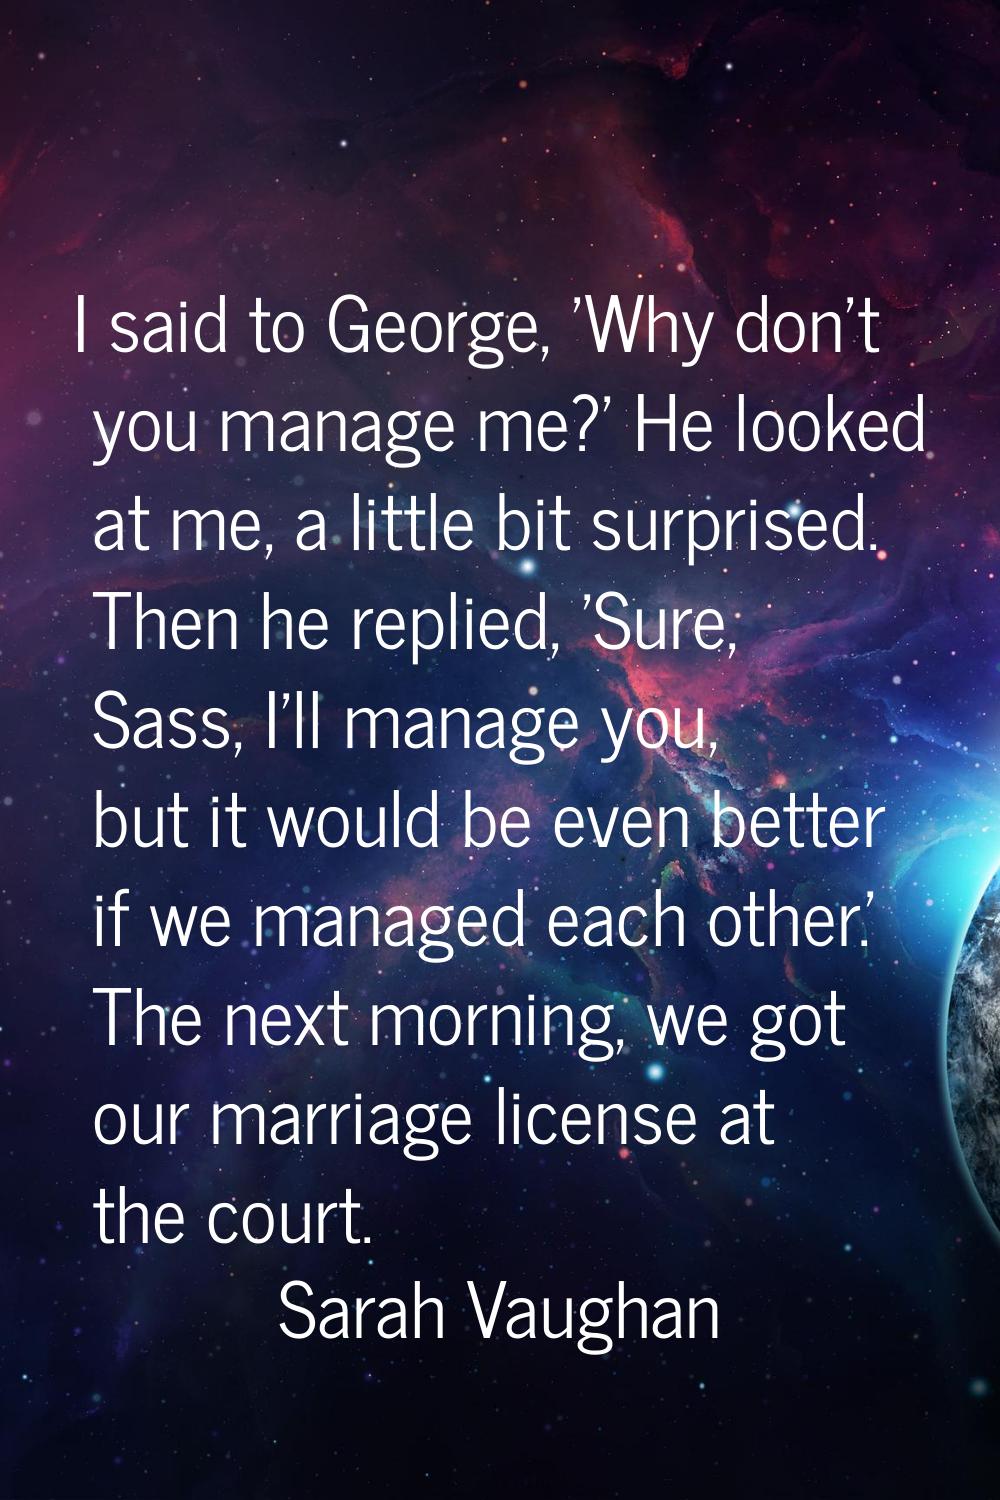 I said to George, 'Why don't you manage me?' He looked at me, a little bit surprised. Then he repli